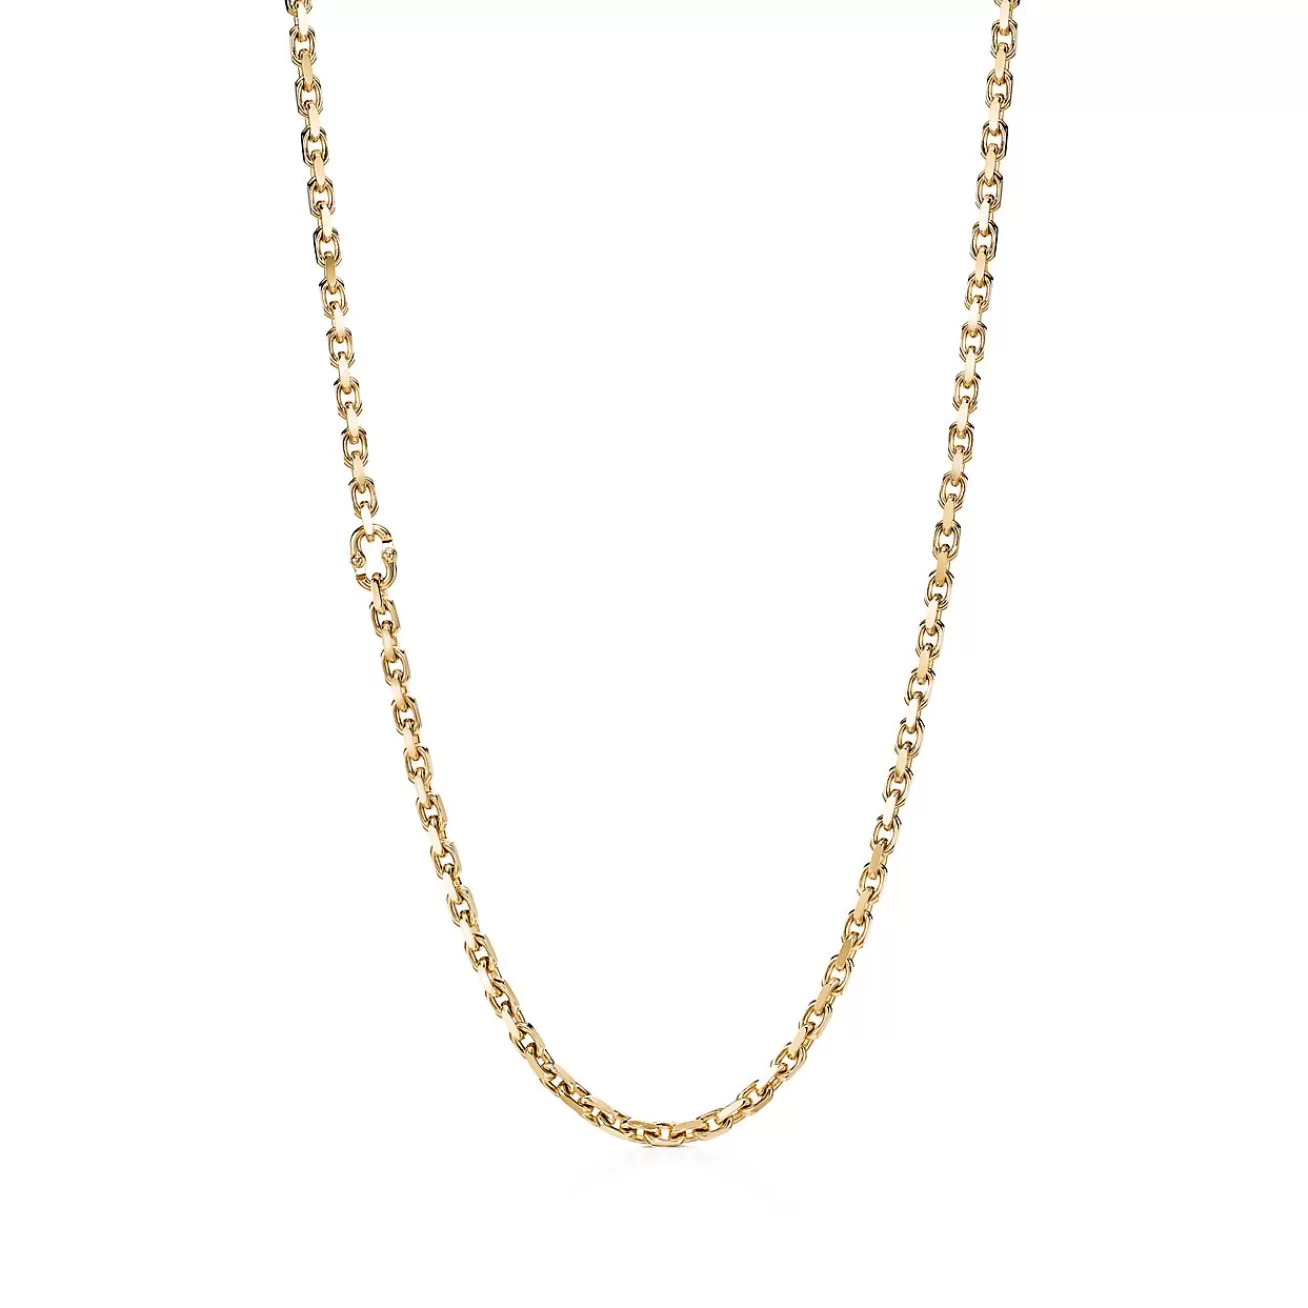 Tiffany & Co. Tiffany 1837® Makers chain necklace in 18k gold, 24". | ^ Necklaces & Pendants | Men's Jewelry